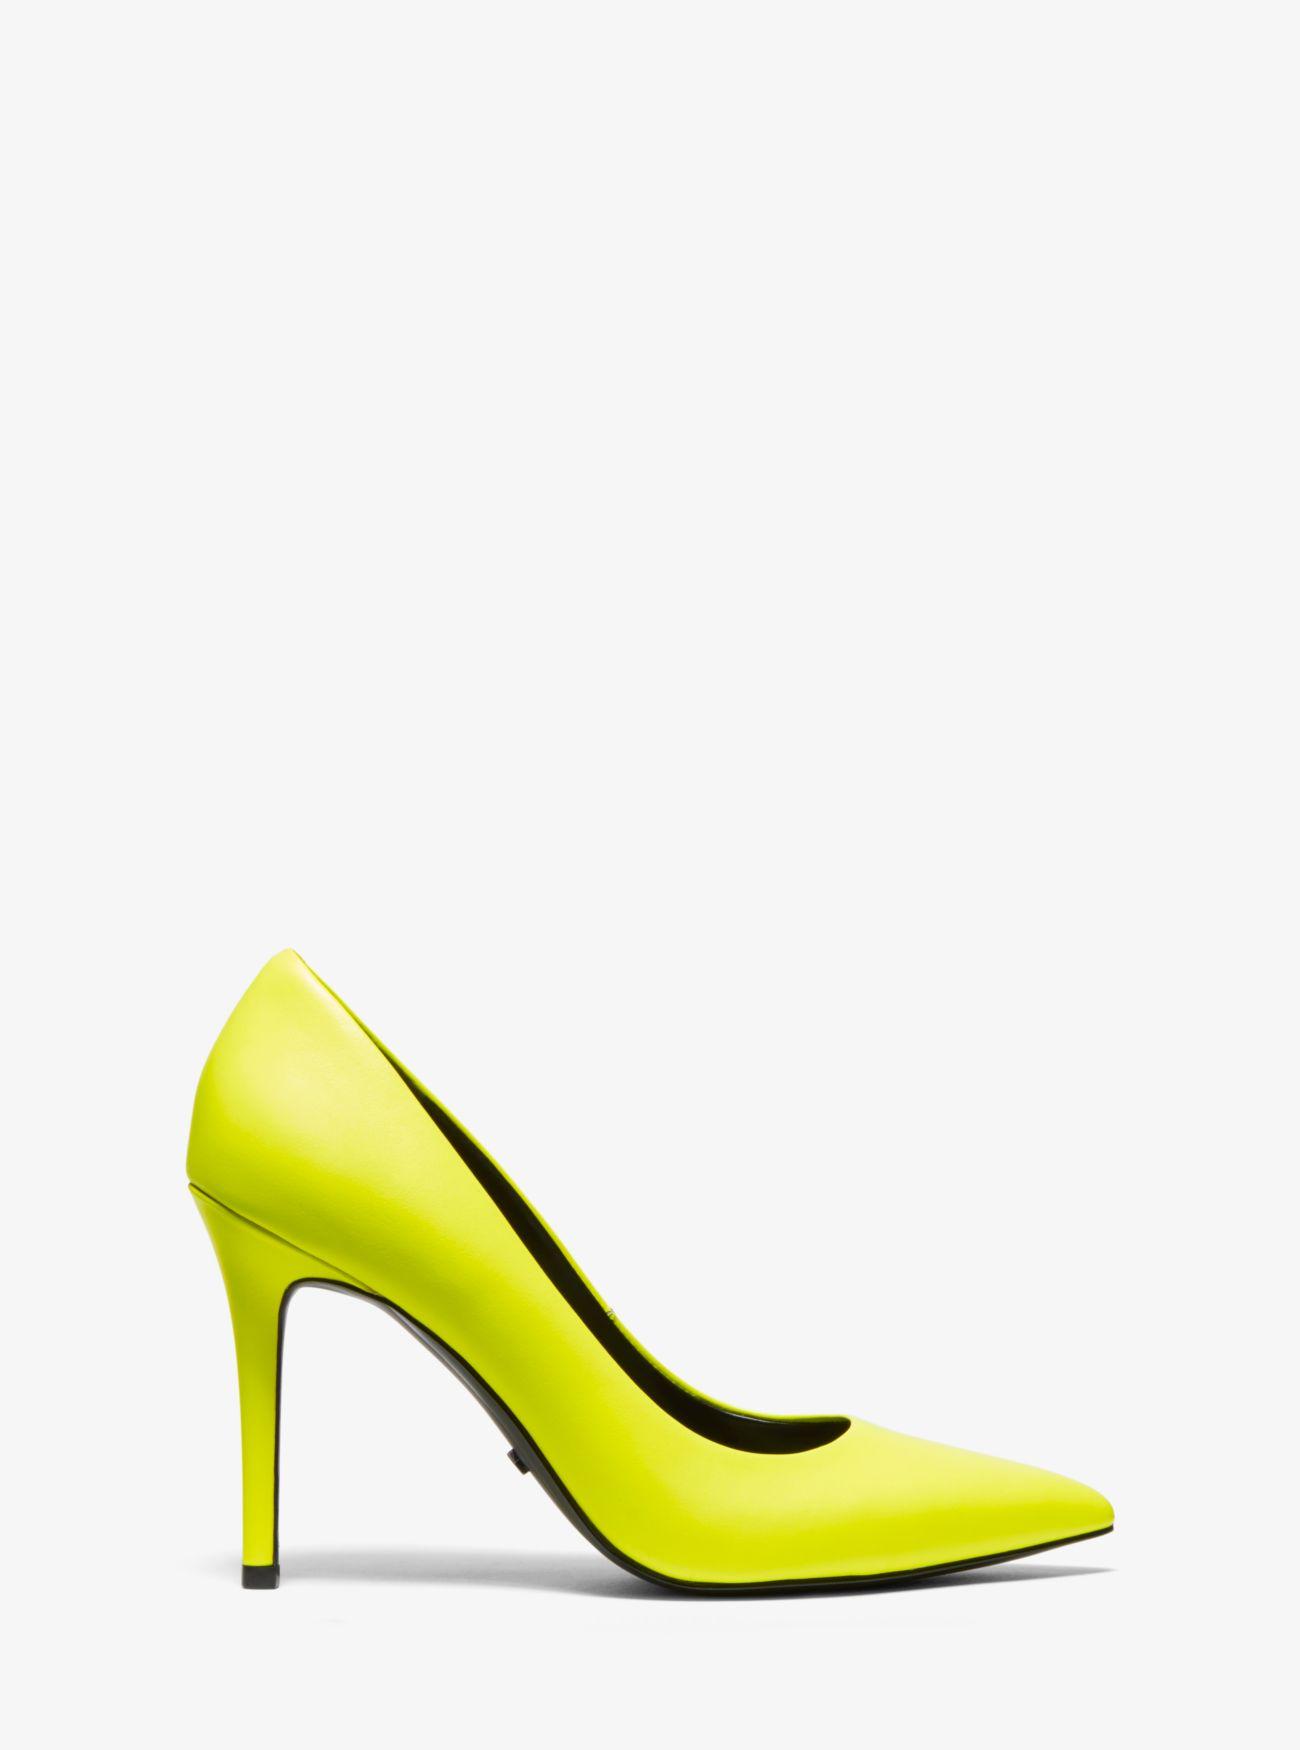 Michael Kors Claire Neon Leather Pump in Yellow | Lyst